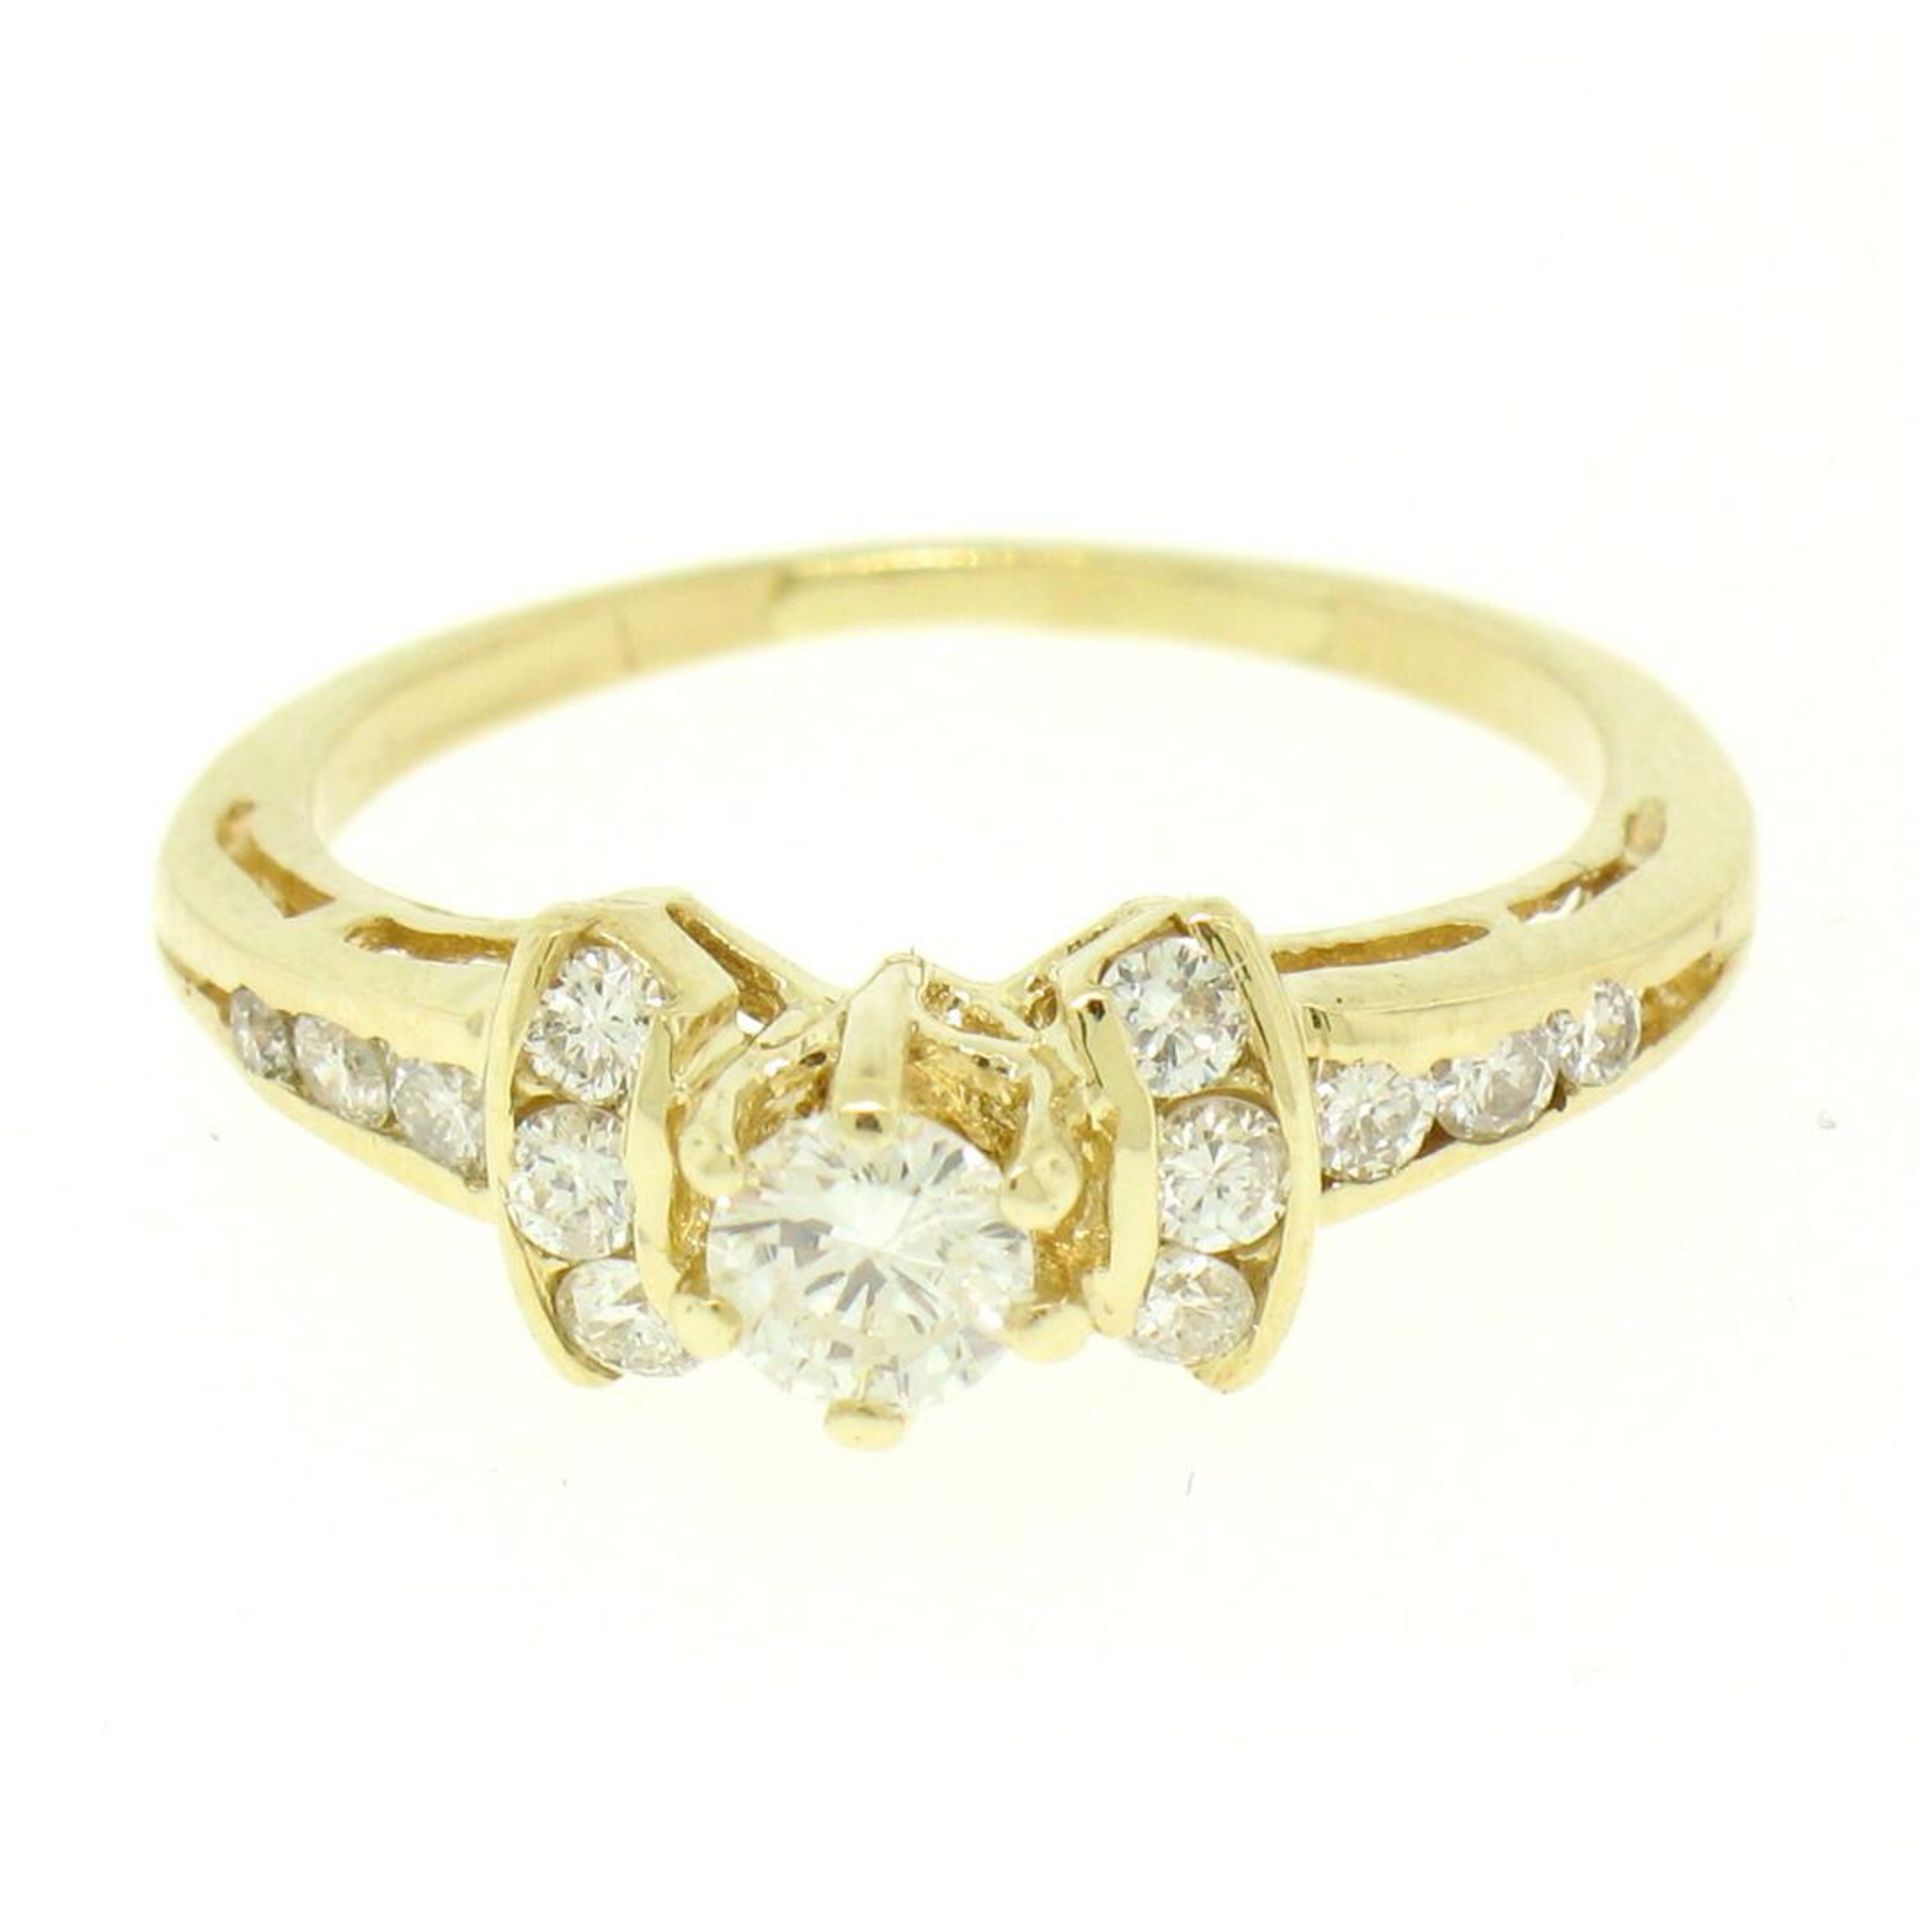 14k Yellow Gold Petite 0.42 ctw Round Diamond Engagement Ring w/ Channel Accents - Image 2 of 8